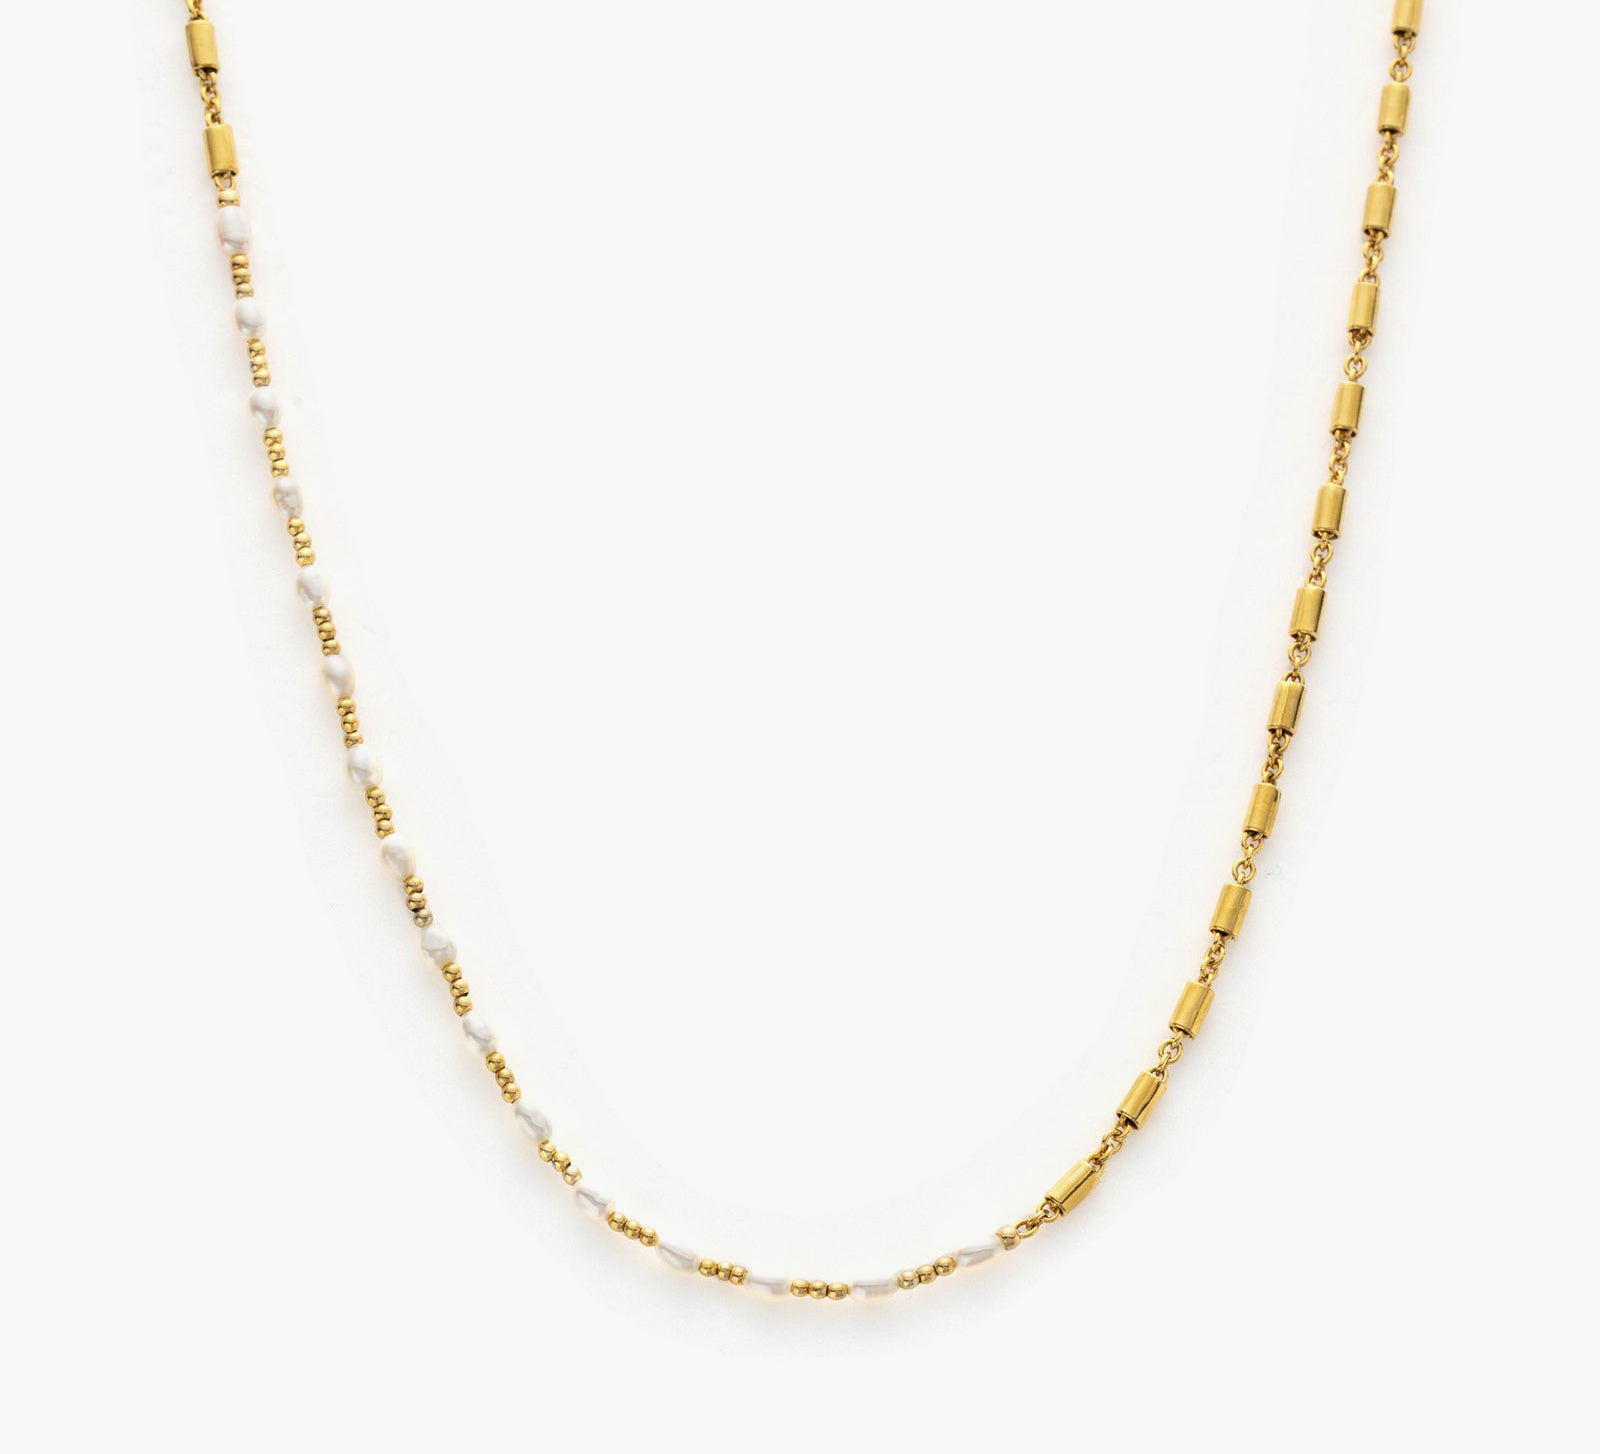 Sea Pearl Beaded Necklace, a timeless piece inspired by the tranquility of the sea, featuring a strand of lustrous pearls delicately interspersed with beads for an elegant and coastal-inspired accessory.